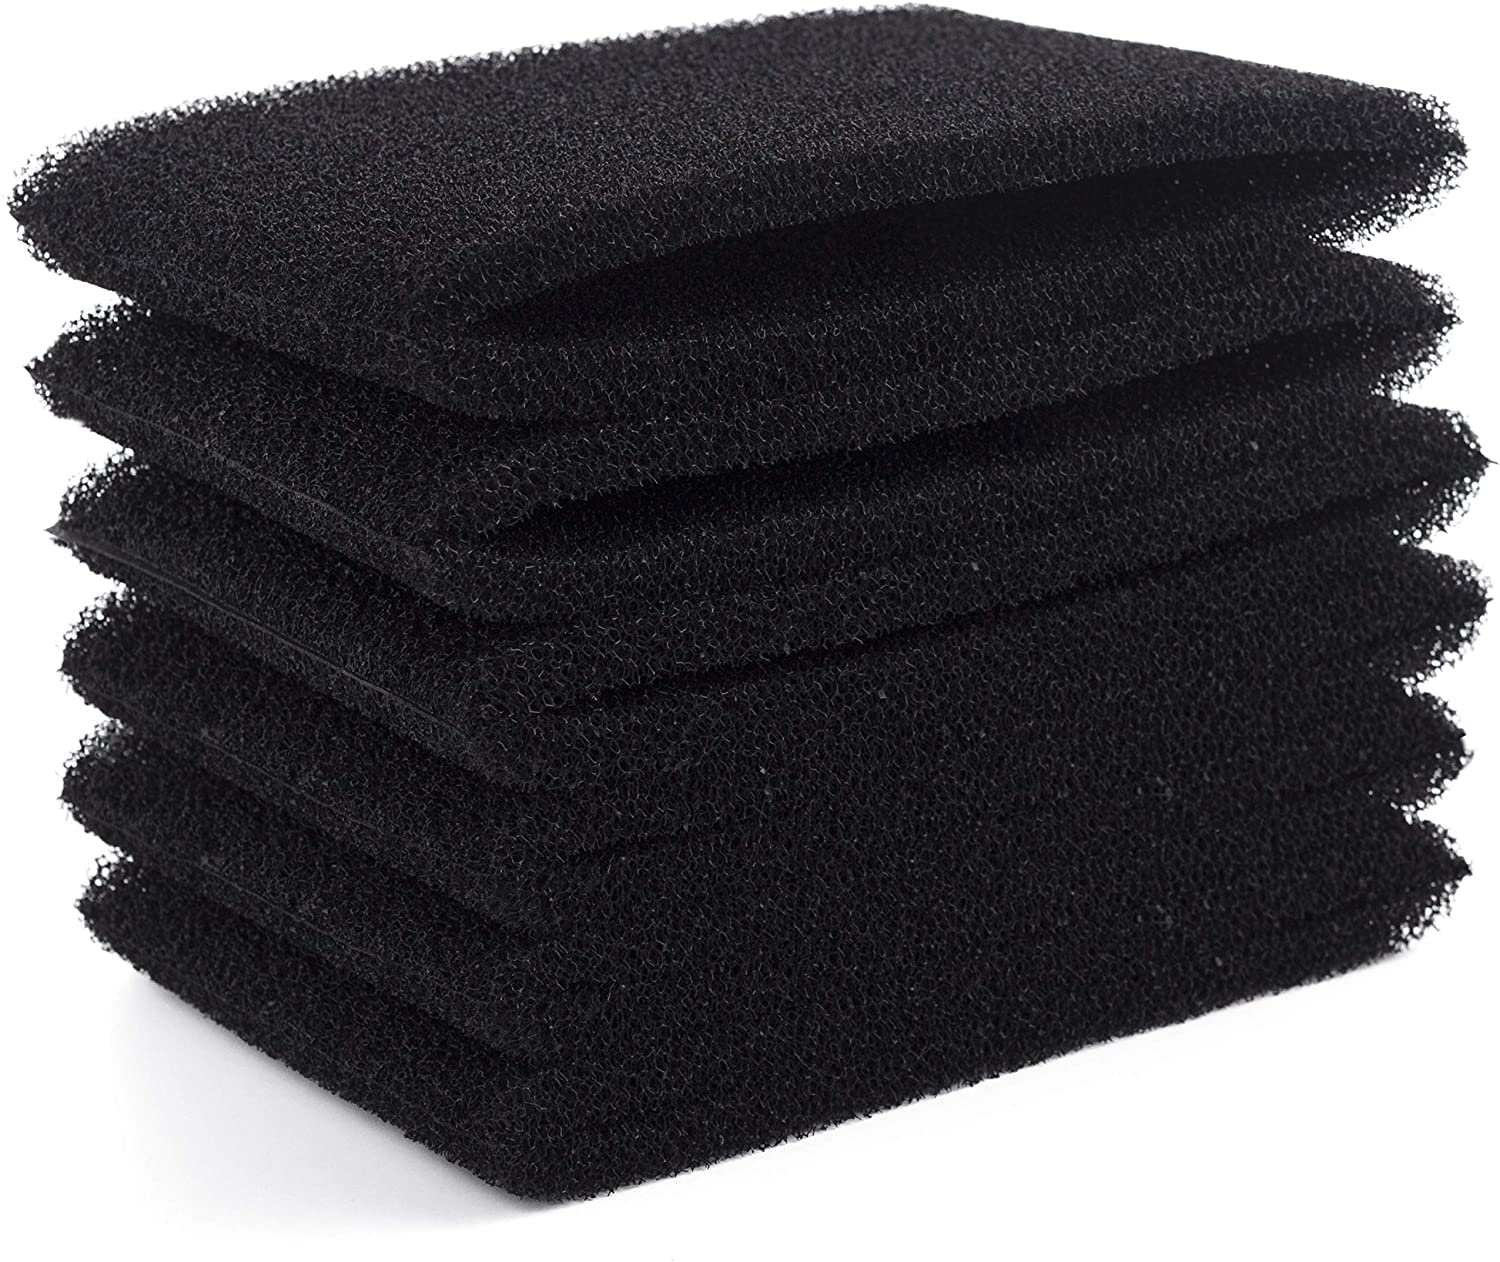 LTWHOME Replacement Foam Sleeve Filter Fit for Shop-Vac Wet Dry Vacuums Cleaners, Compare to Part 90585 & 9058500 Type R (Pack of 6)